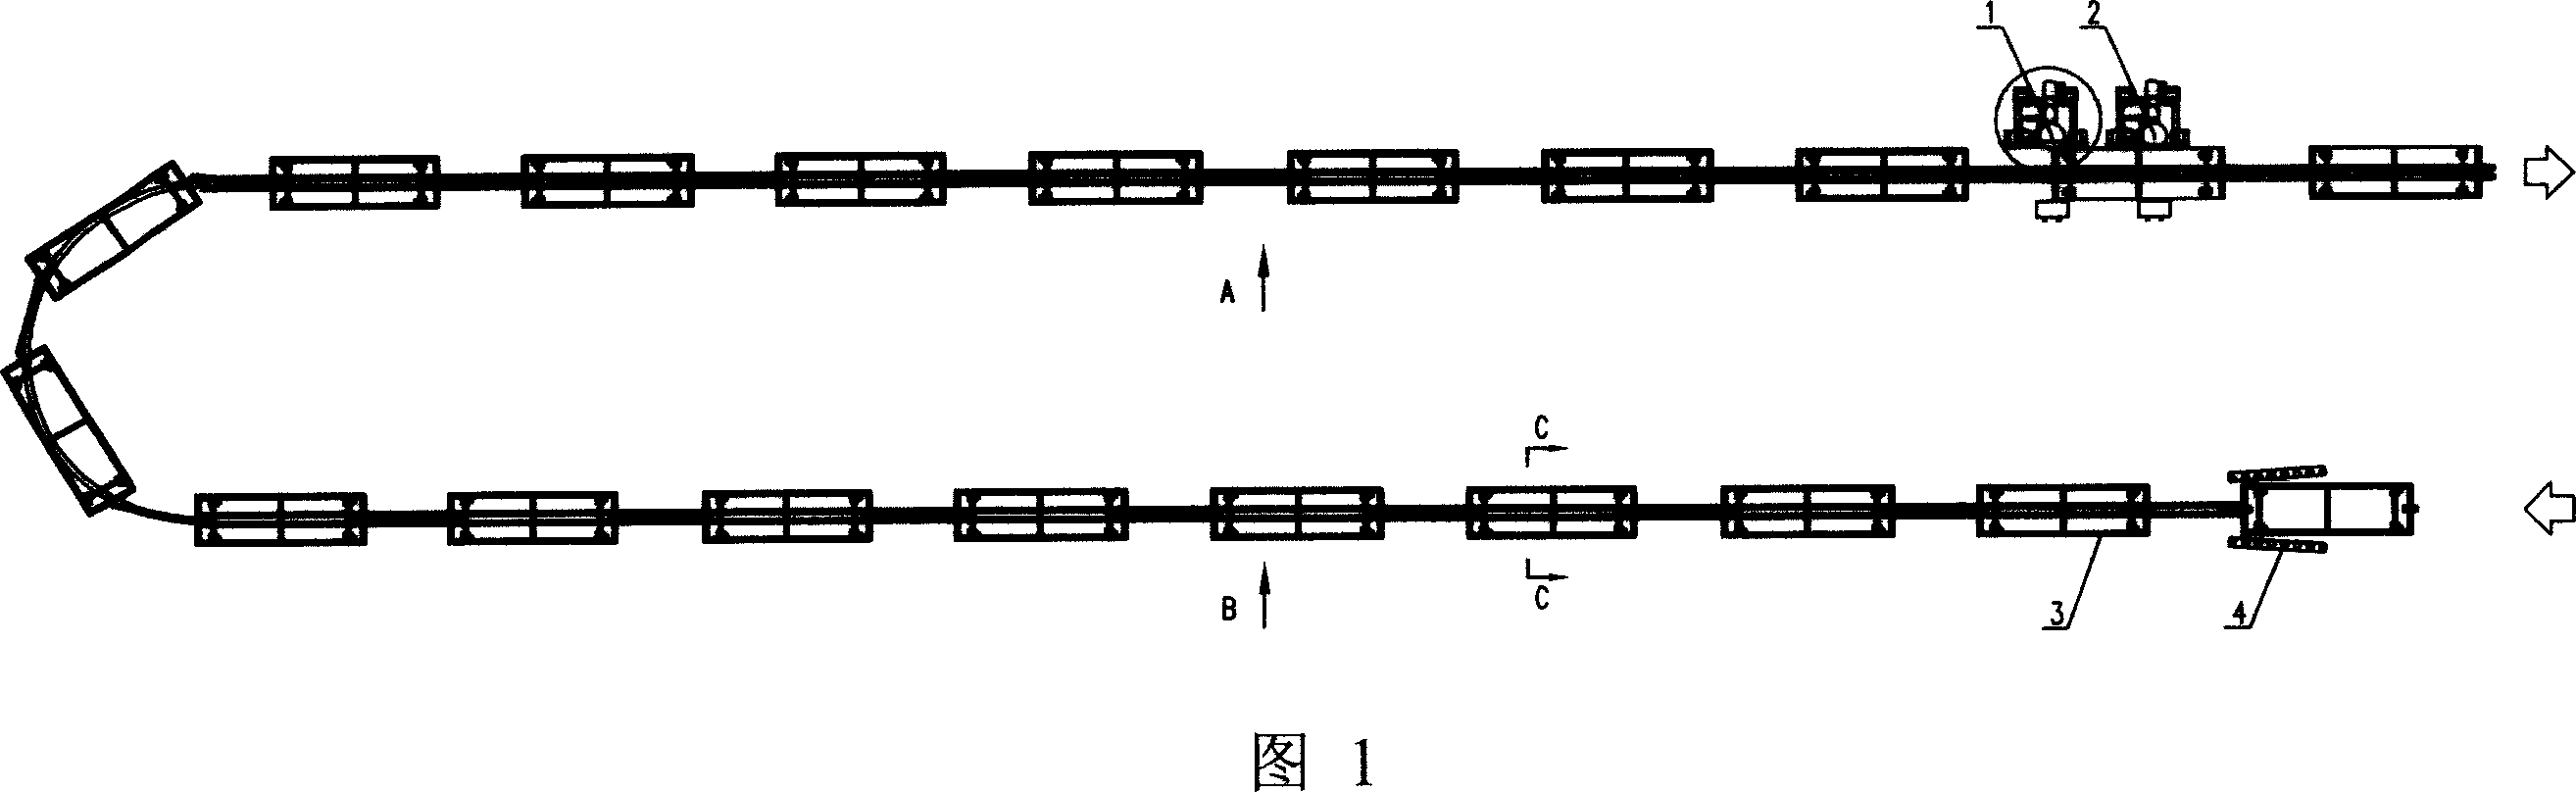 Frictional conveying system with grouped bogies